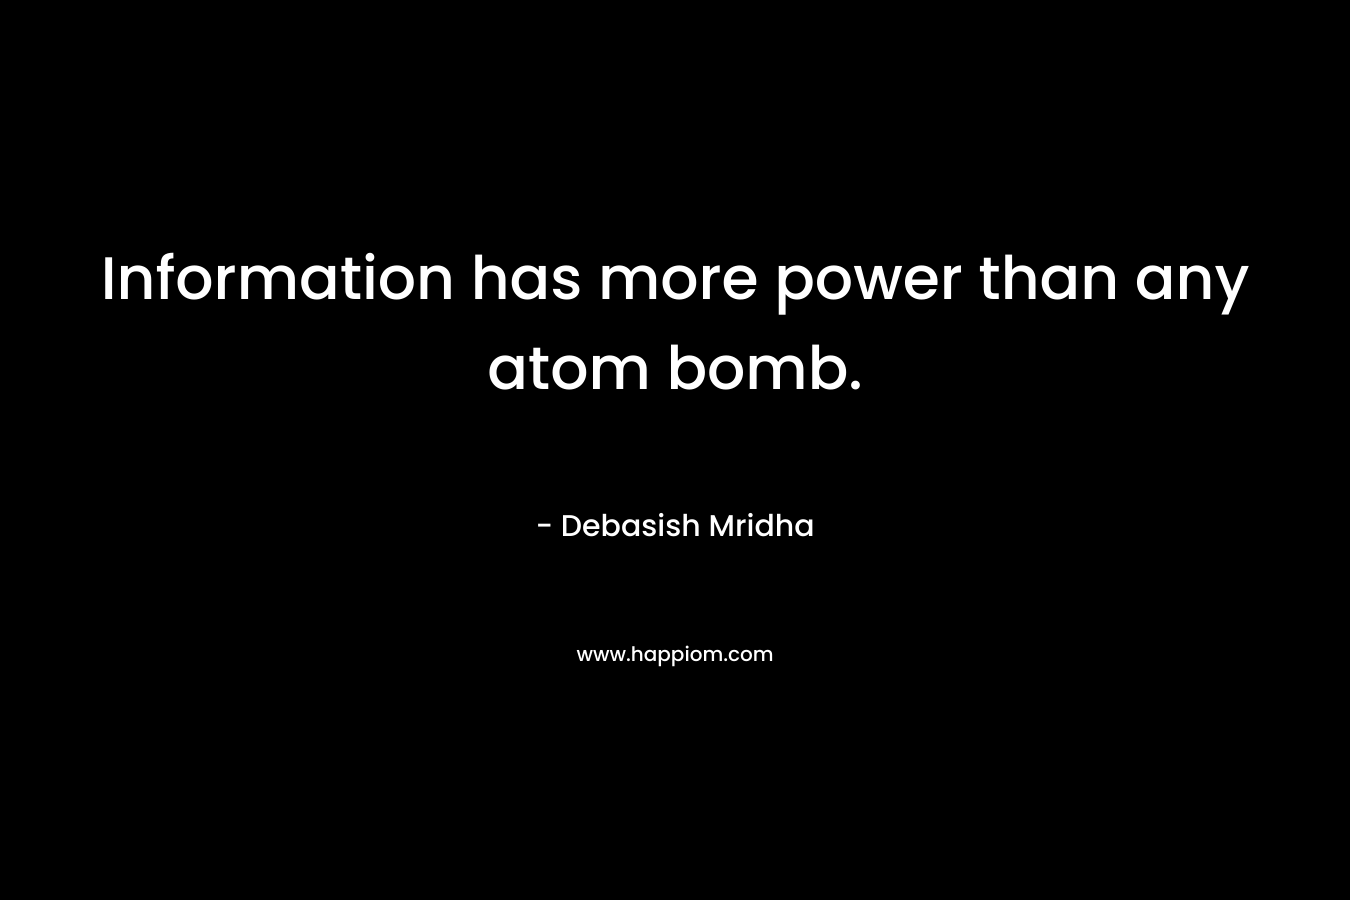 Information has more power than any atom bomb.